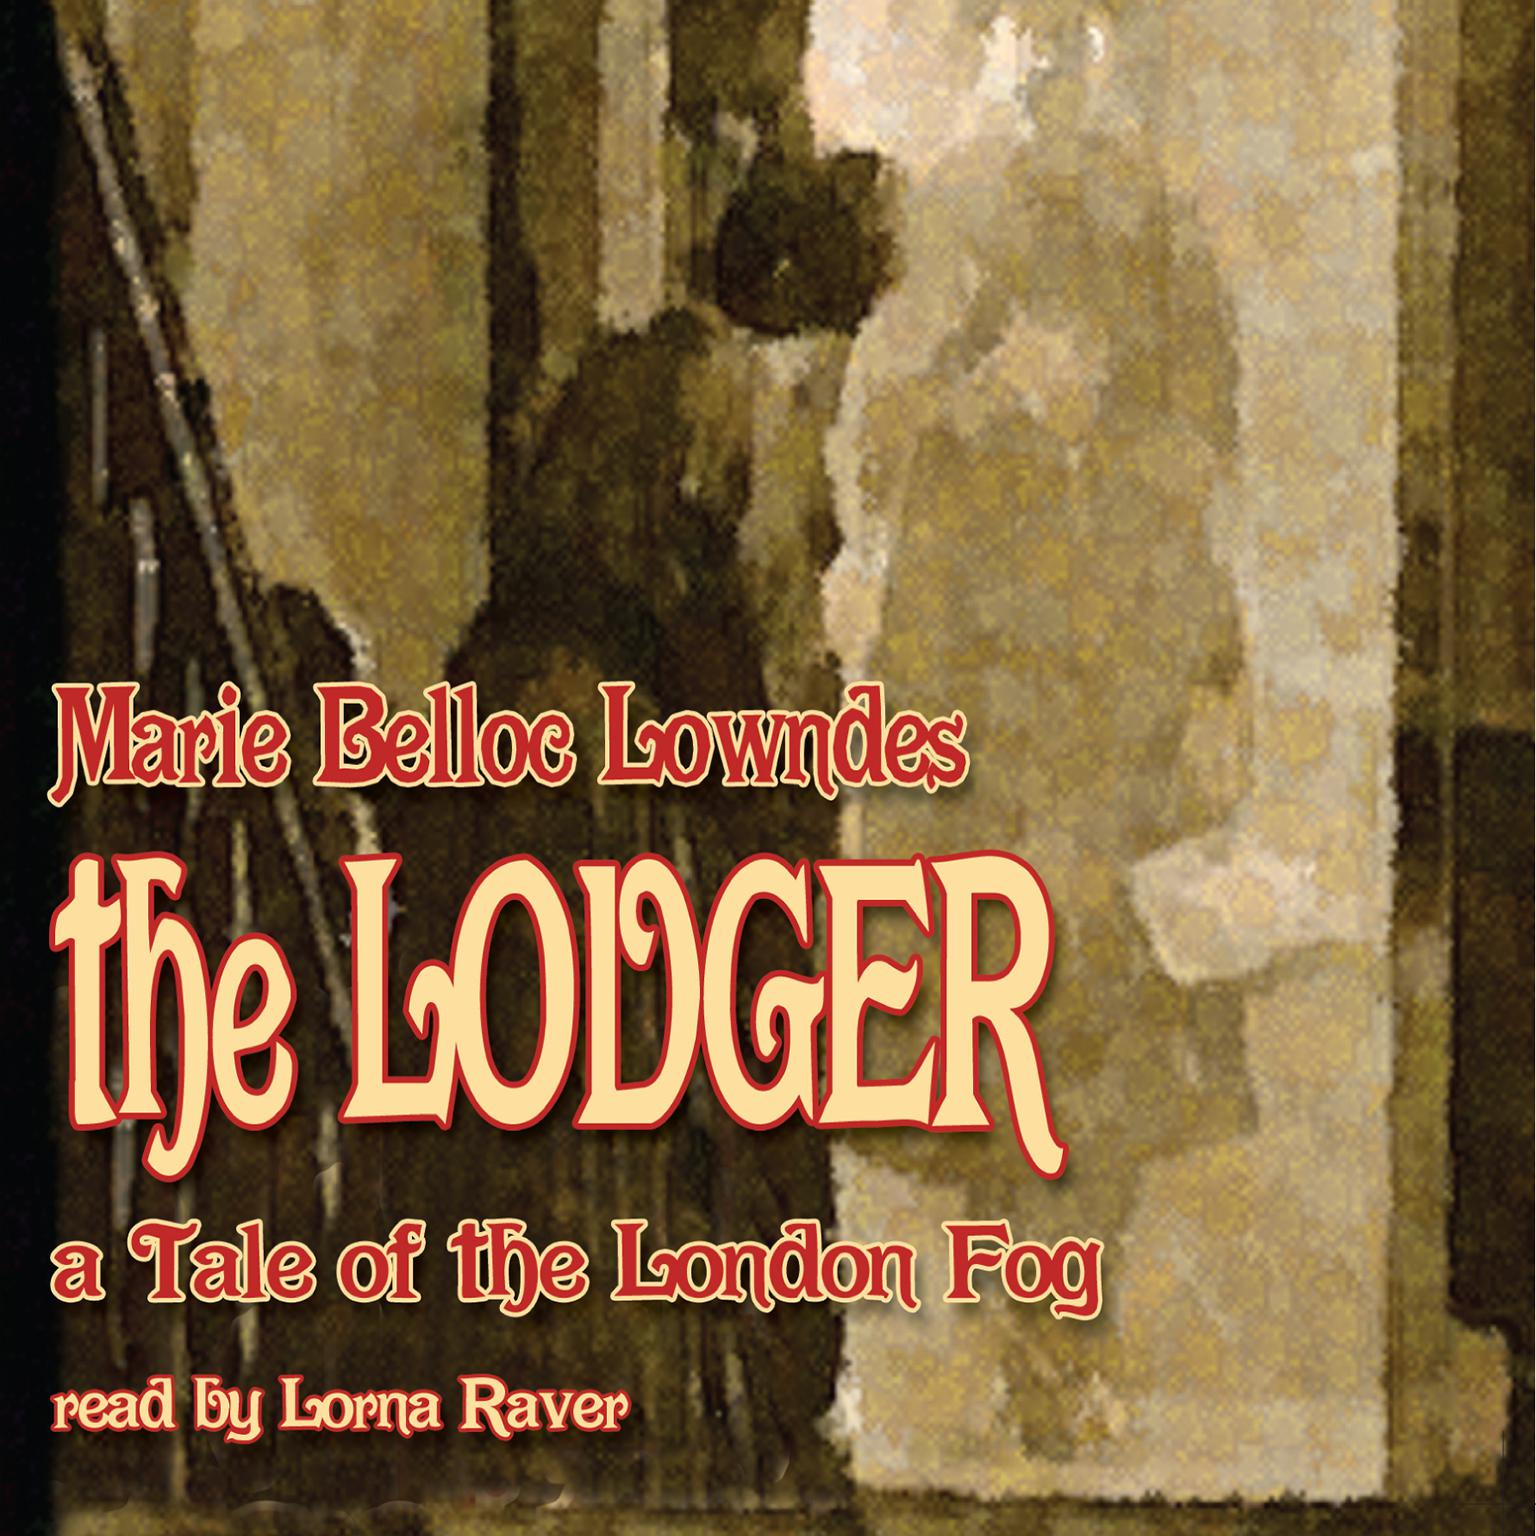 The Lodger: A Tale of the London Fog Audiobook, by Marie Belloc Lowndes